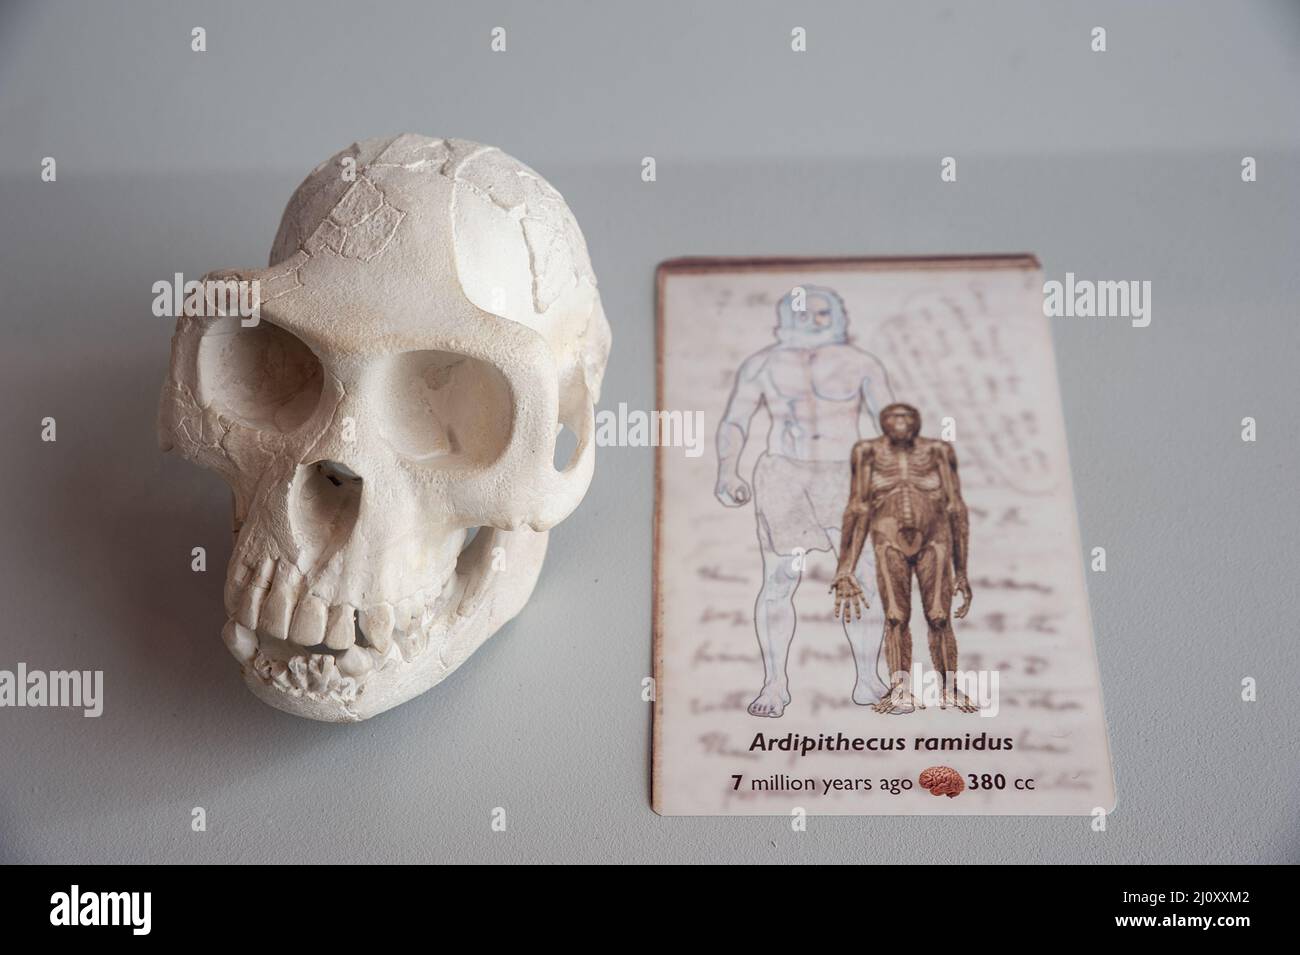 Siena, Italy - 2022, March 10: Ardipithecus ramidus human skull, with explanatory caption, in a showcase at the Museum of Natural History “Accademia F Stock Photo